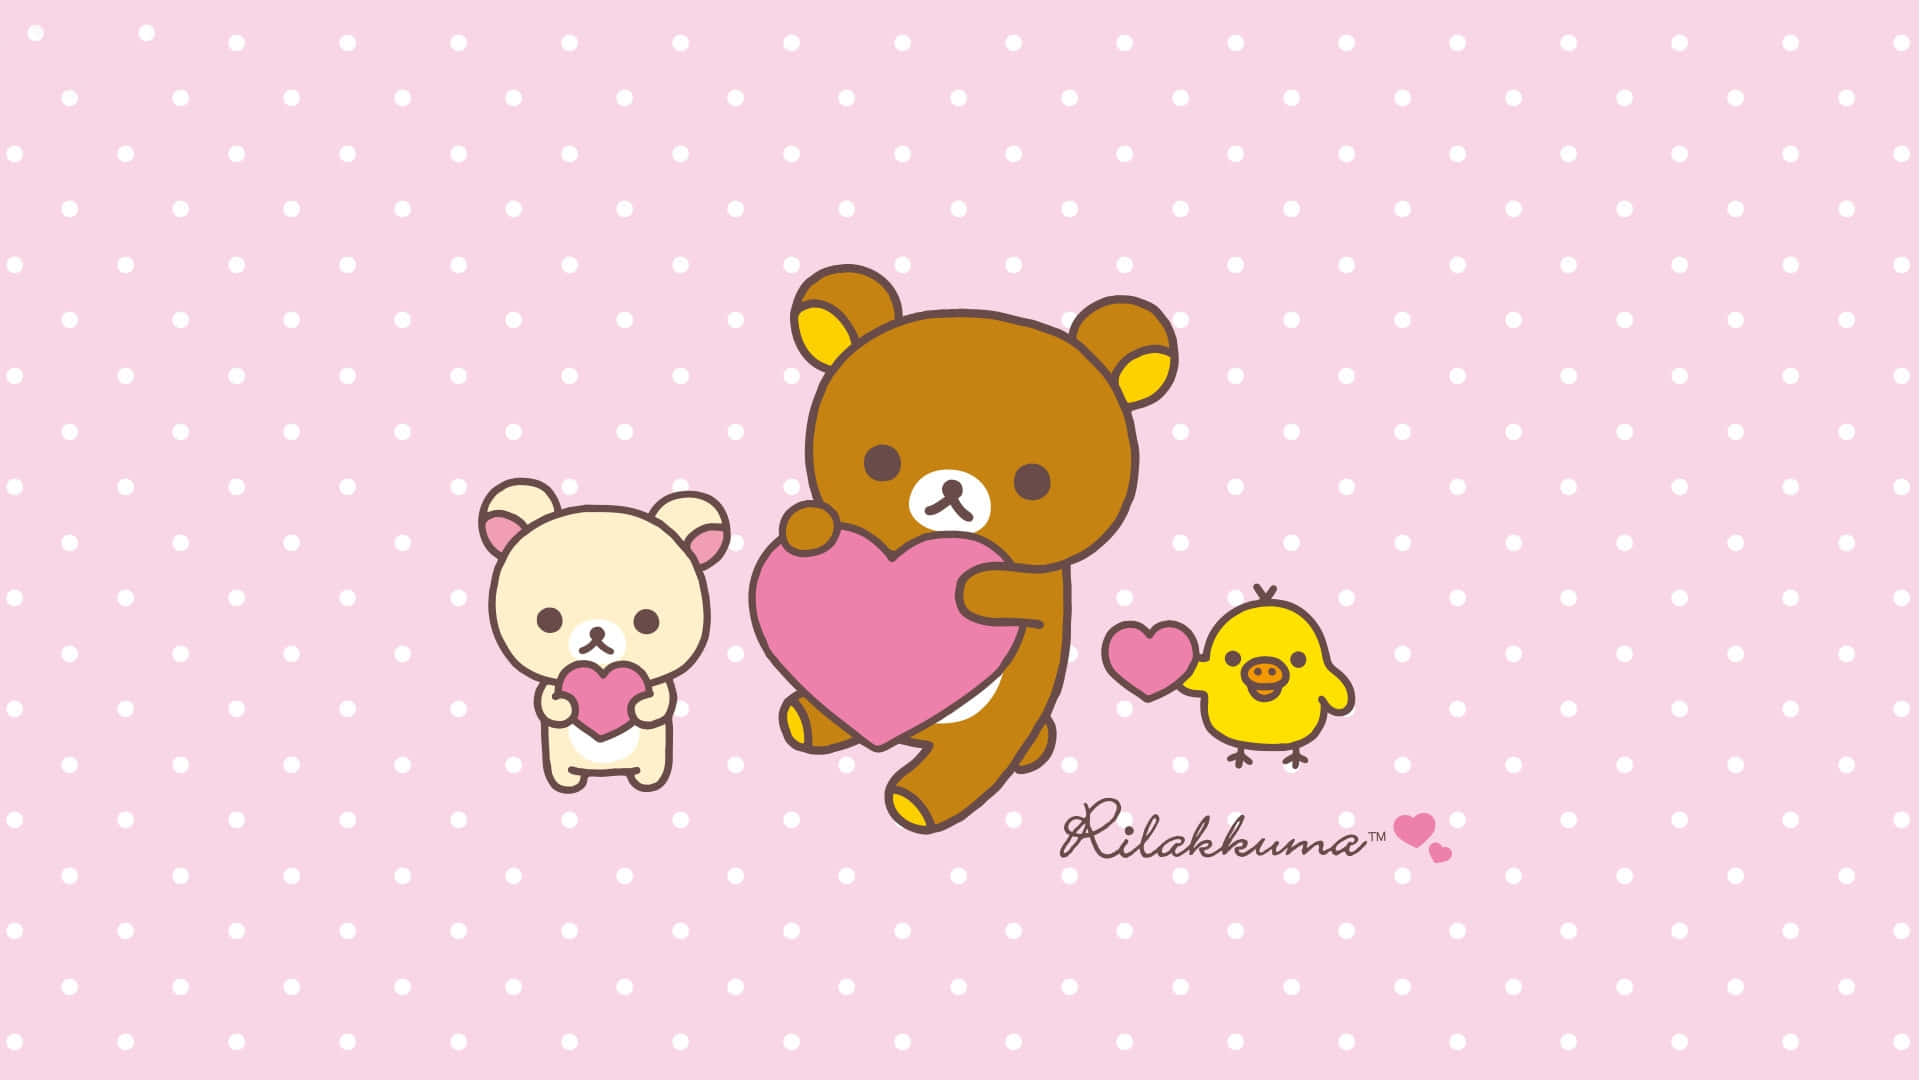 Get your work done with Rilakkuma's cuteness Wallpaper